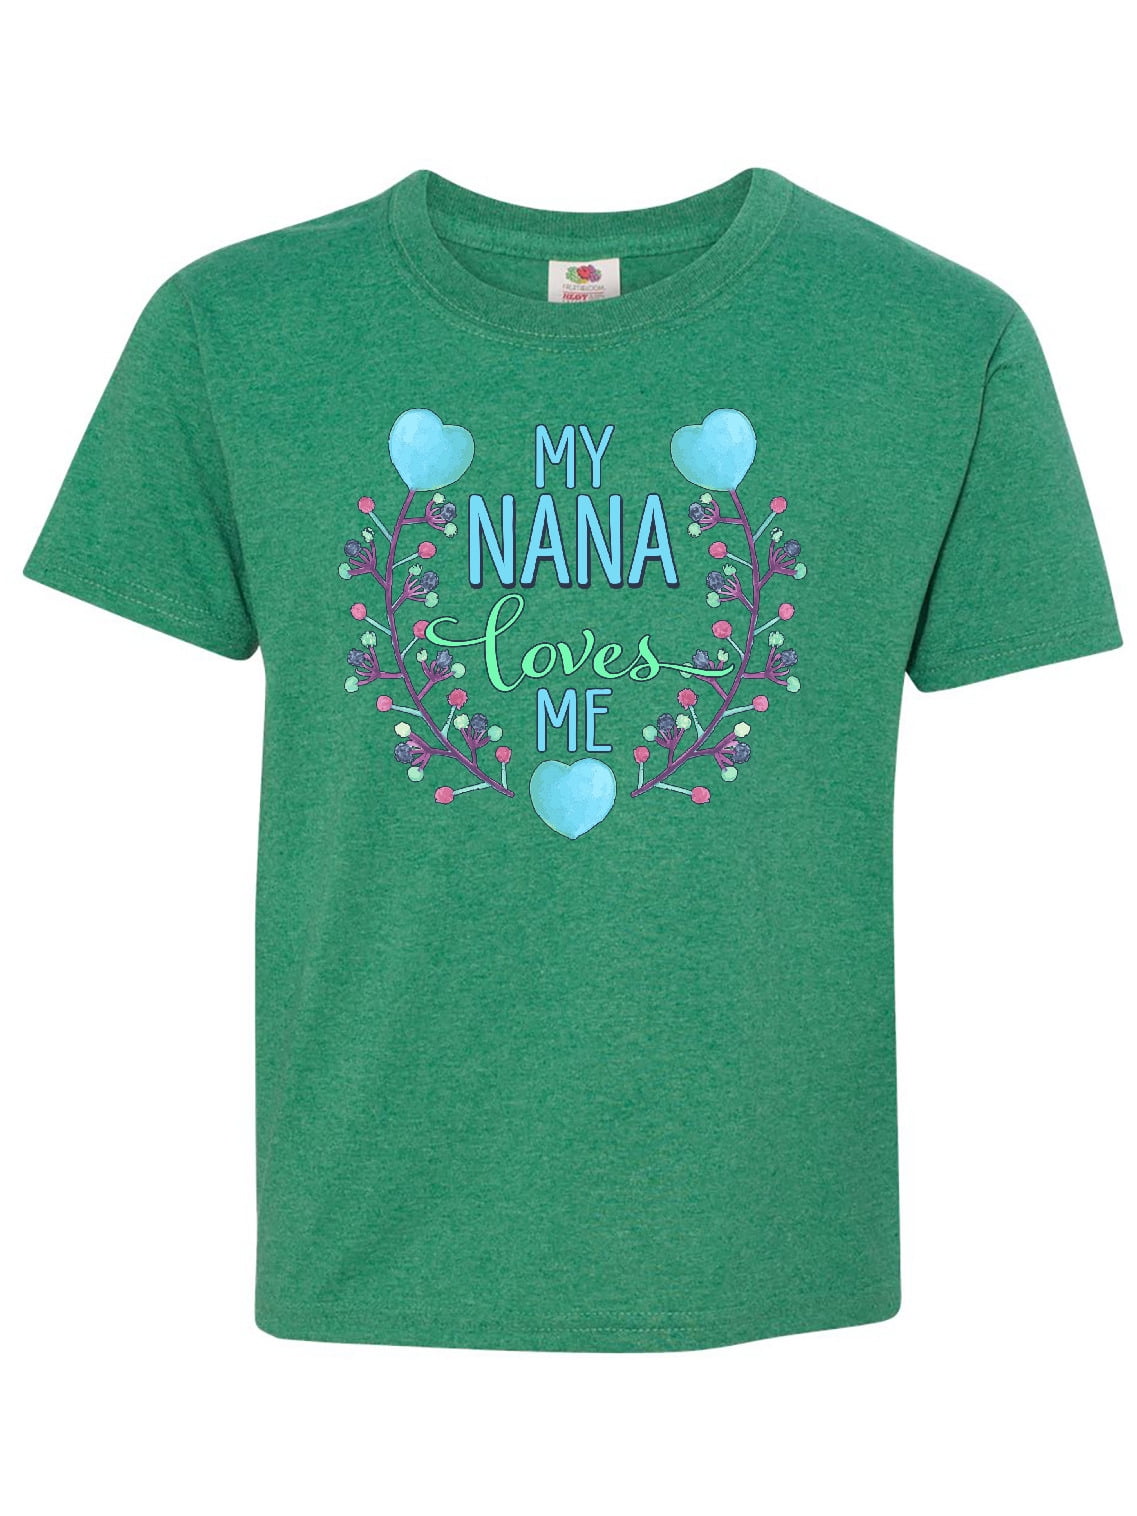 inktastic My Nana Loves Me with Flowers and Hearts Baby T-Shirt